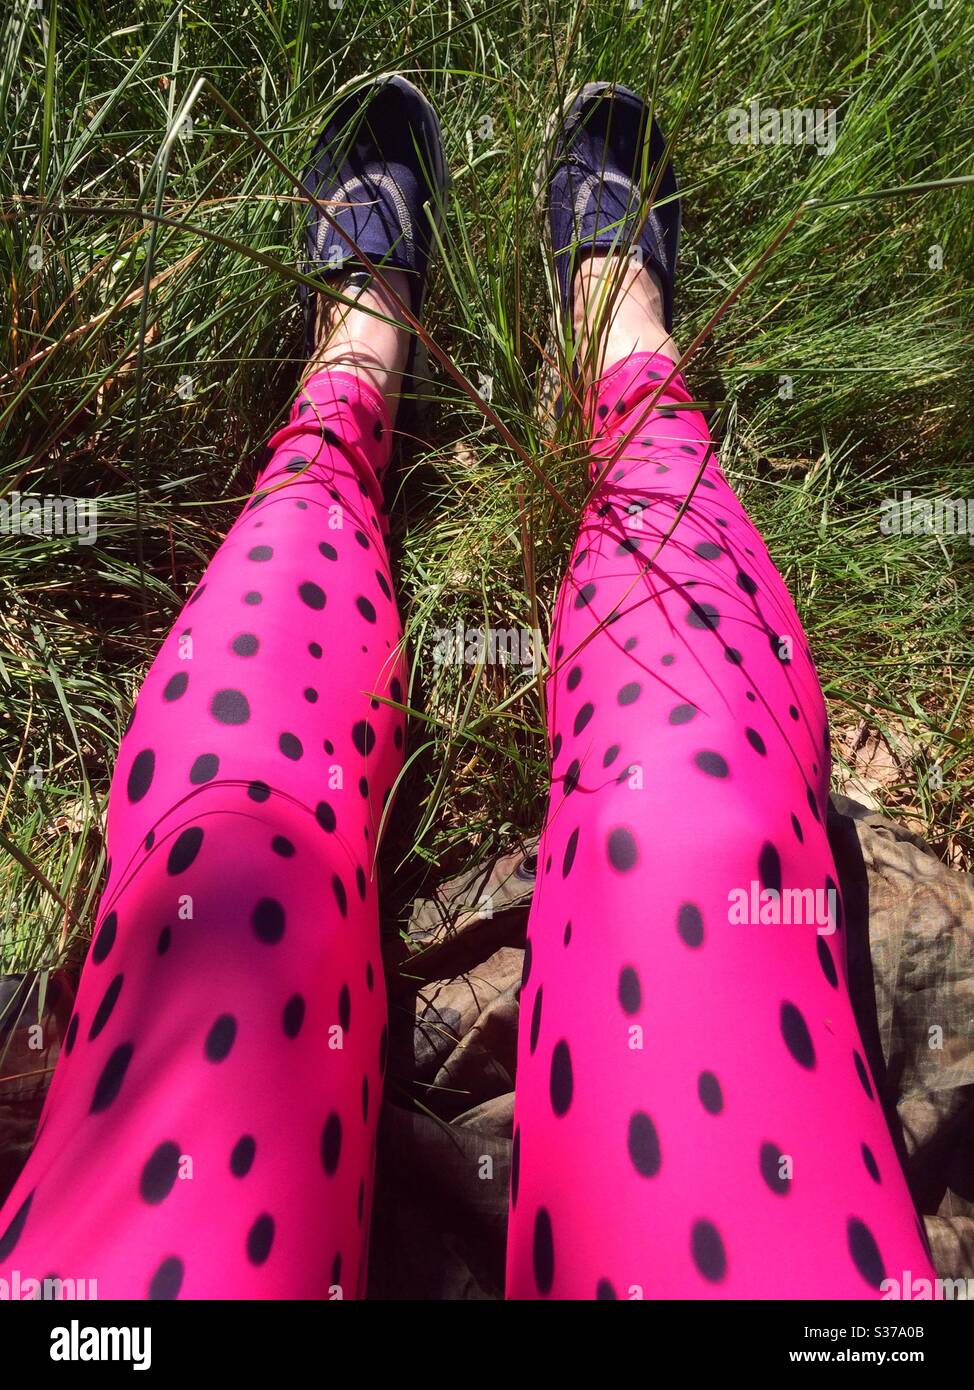 https://c8.alamy.com/comp/S37A0B/legs-of-woman-sitting-in-long-grass-in-summer-wearing-brightly-coloured-pink-leggings-S37A0B.jpg